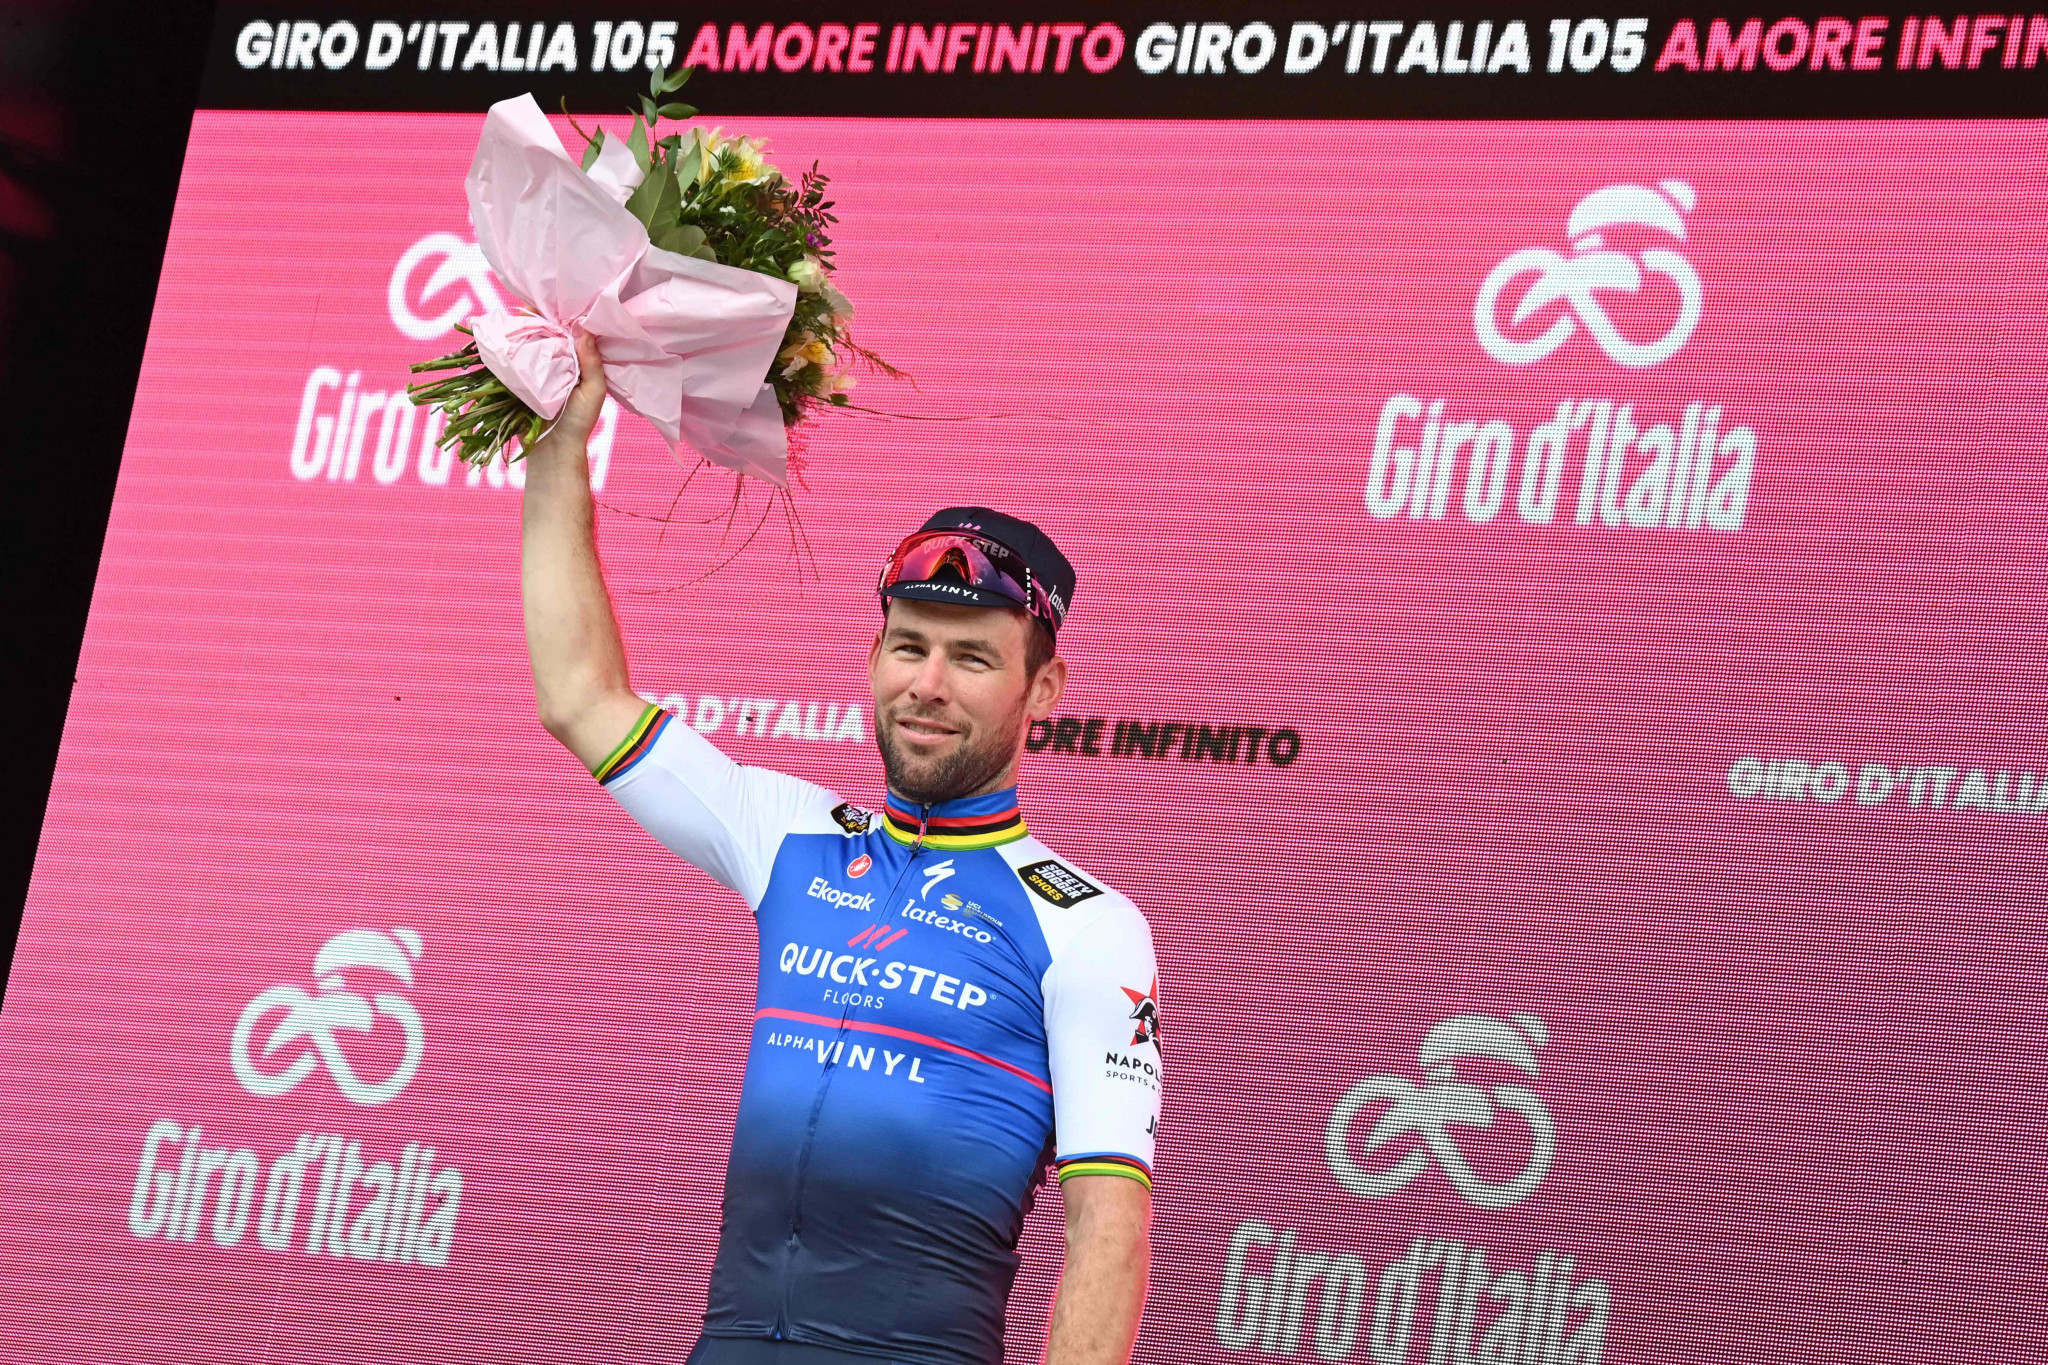 Mark Cavendish is participating at the Giro d'Italia for the first time since 2013 ©Getty Images